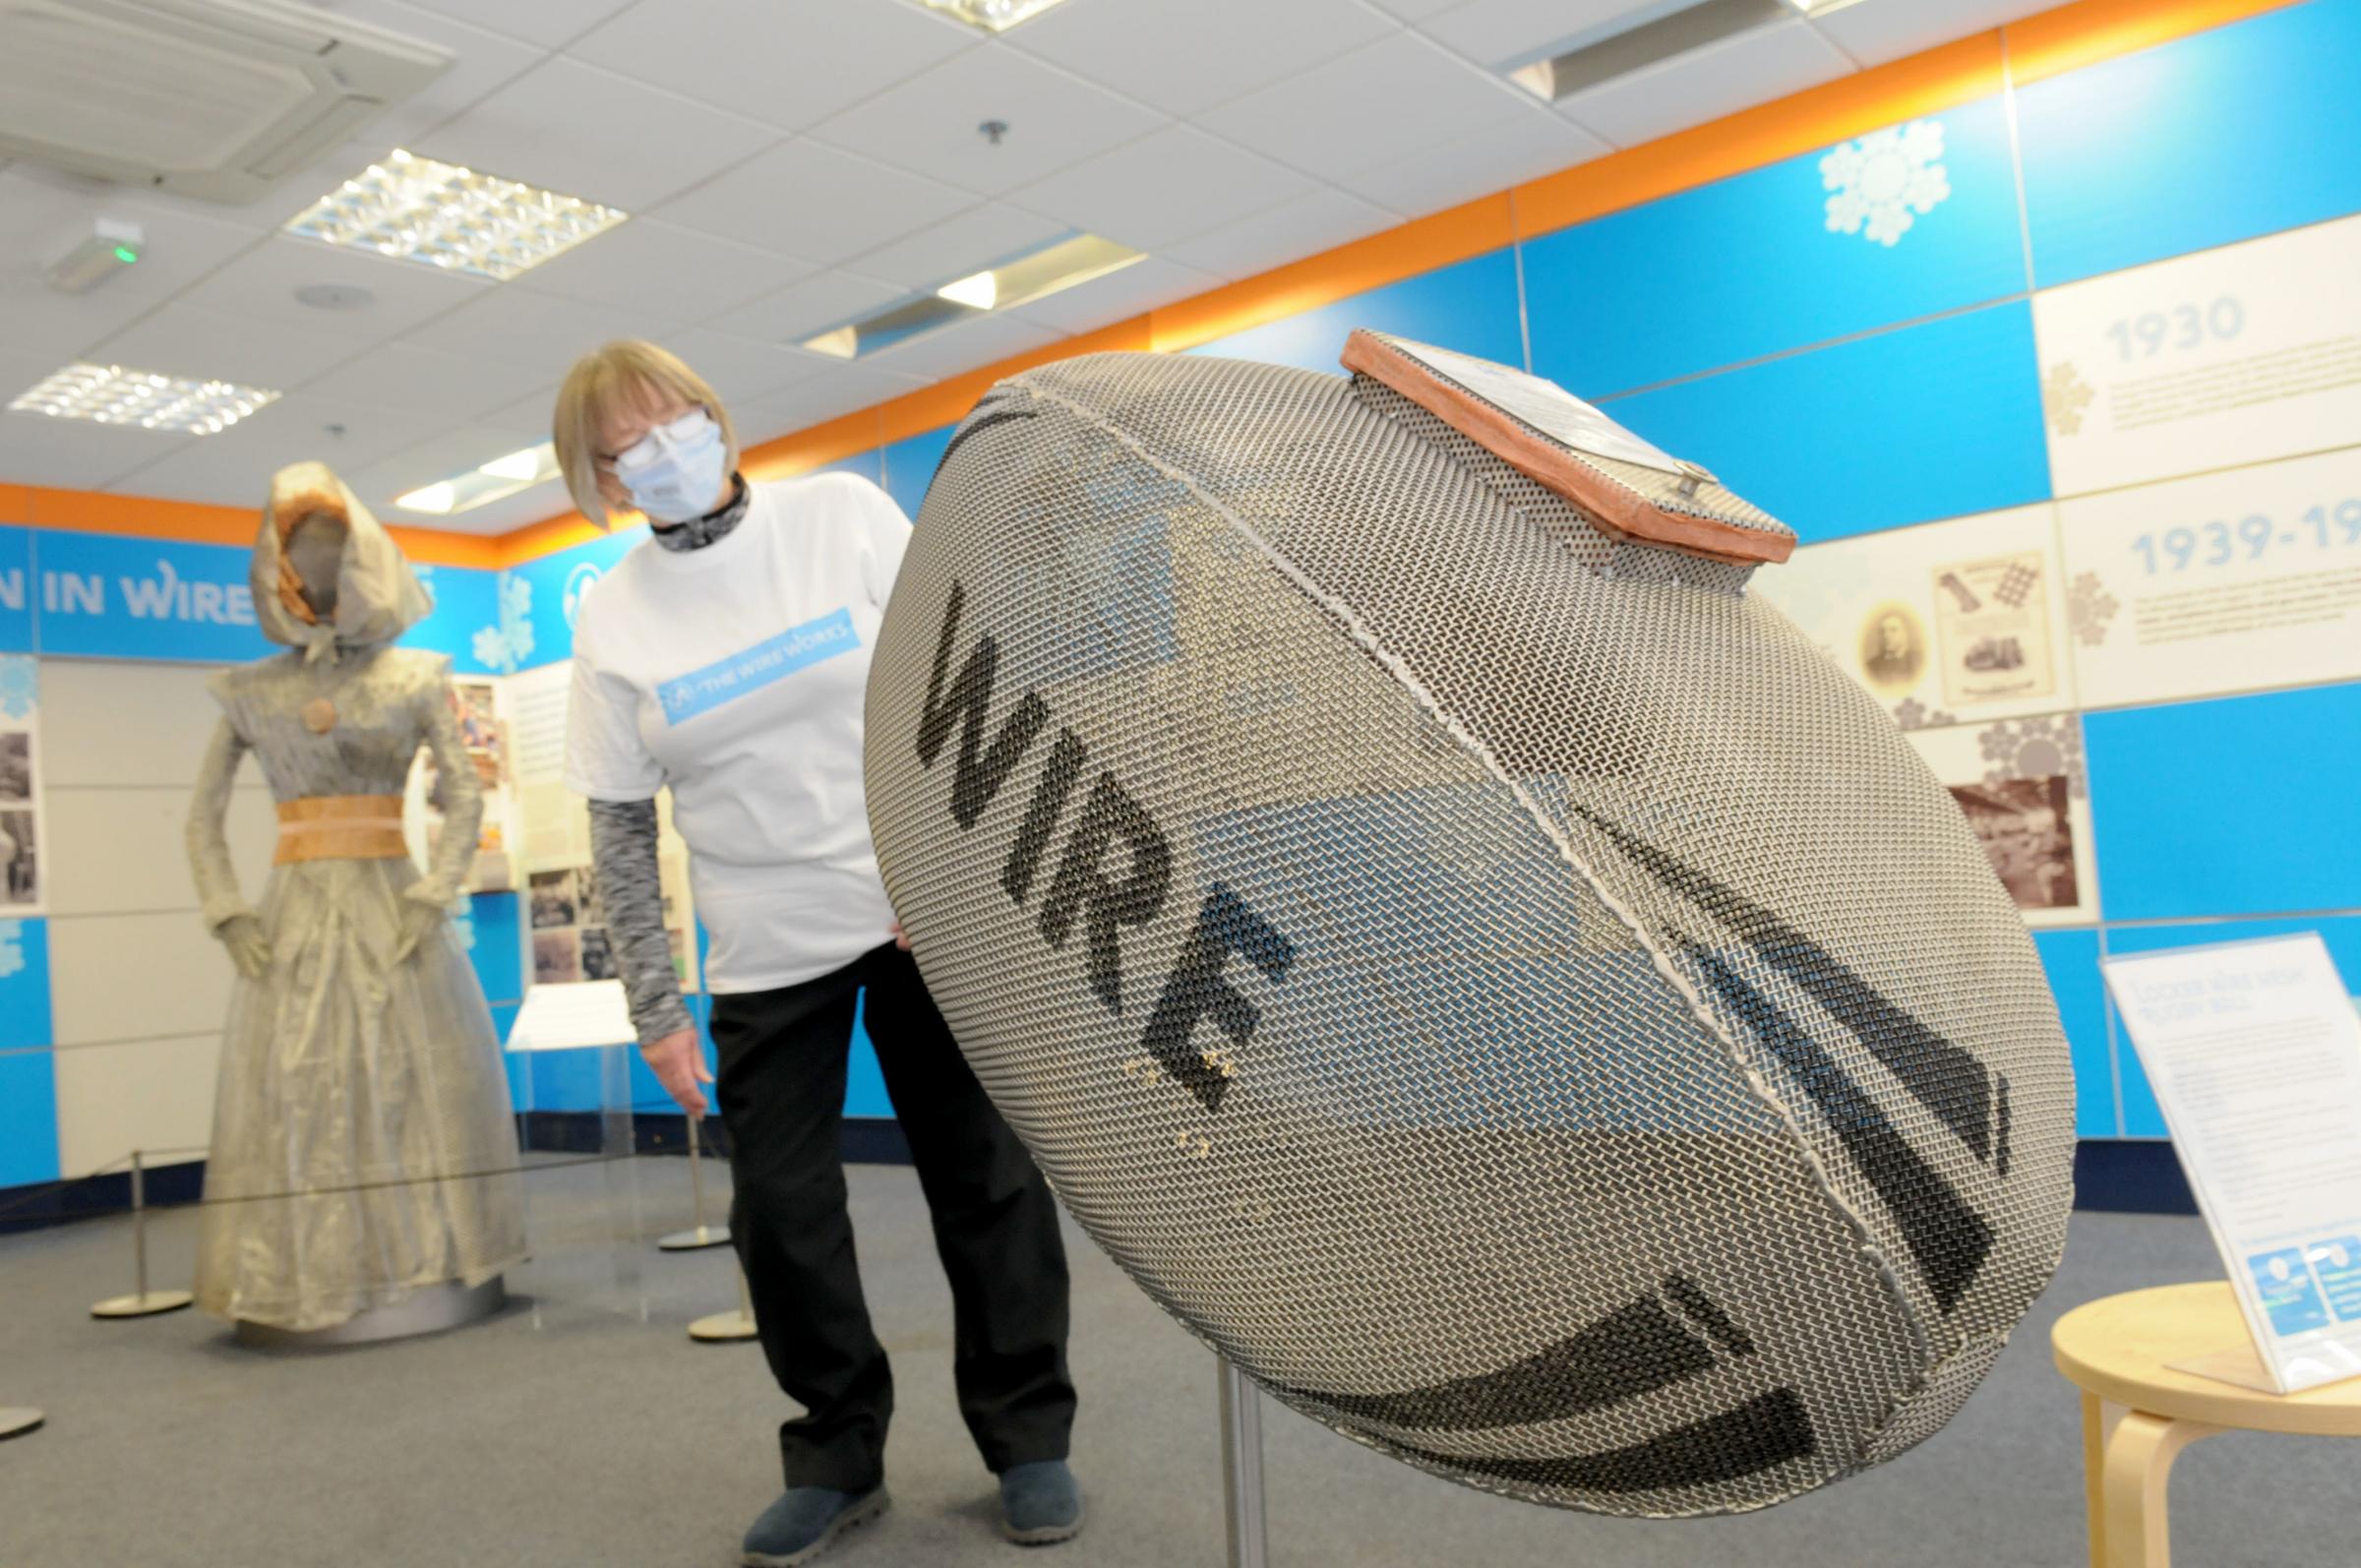 A volunteer looks at the Wire Works exhibition of a Wire ball